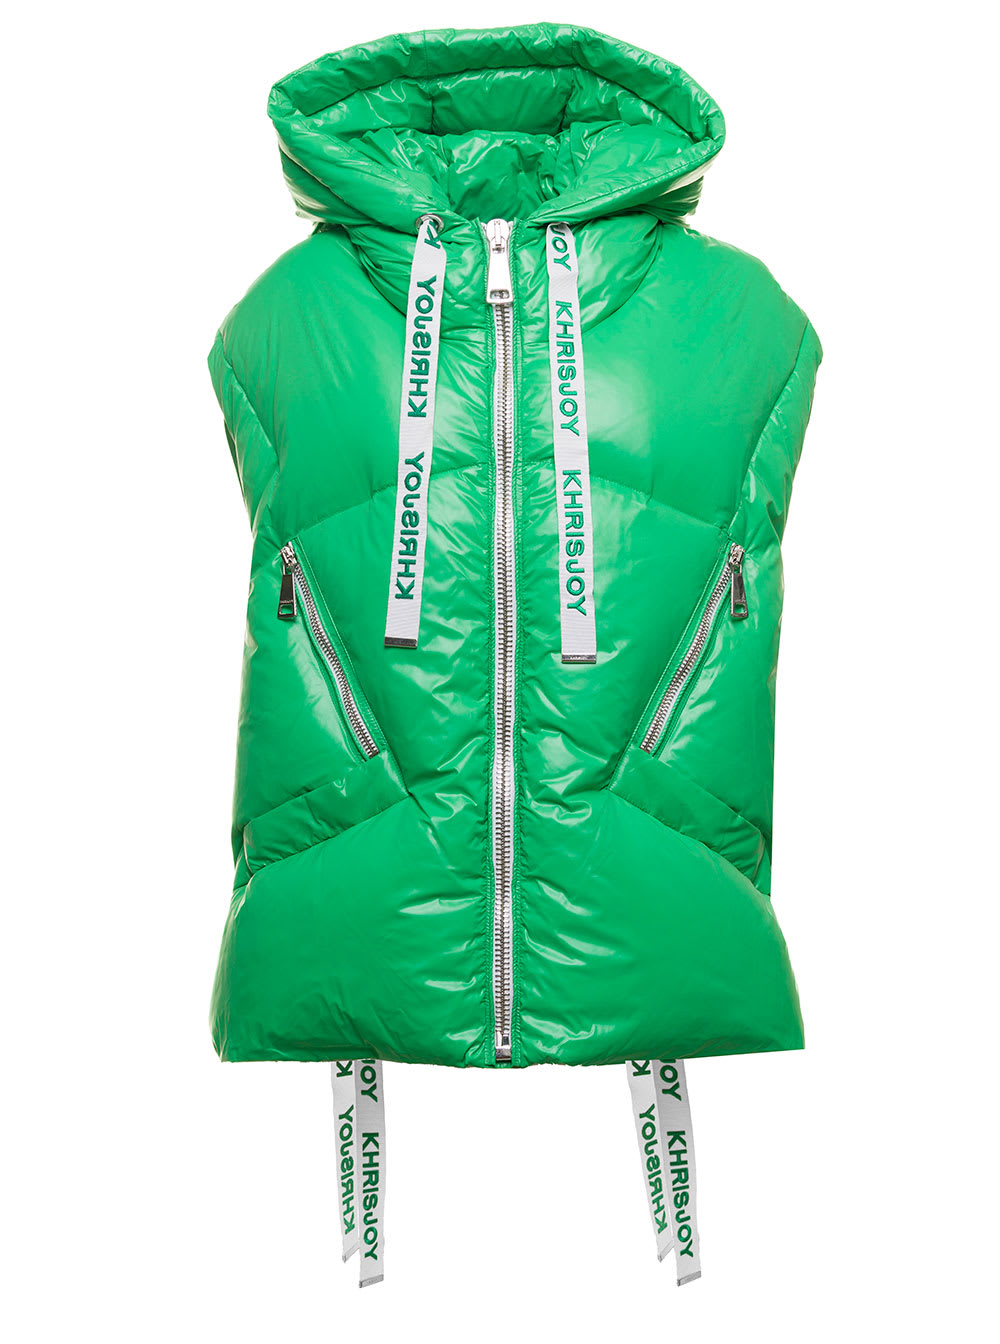 Khrisjoy Iconic Shiny Green Sleeveless Down Jacket In Patent Technical Fabric Woman